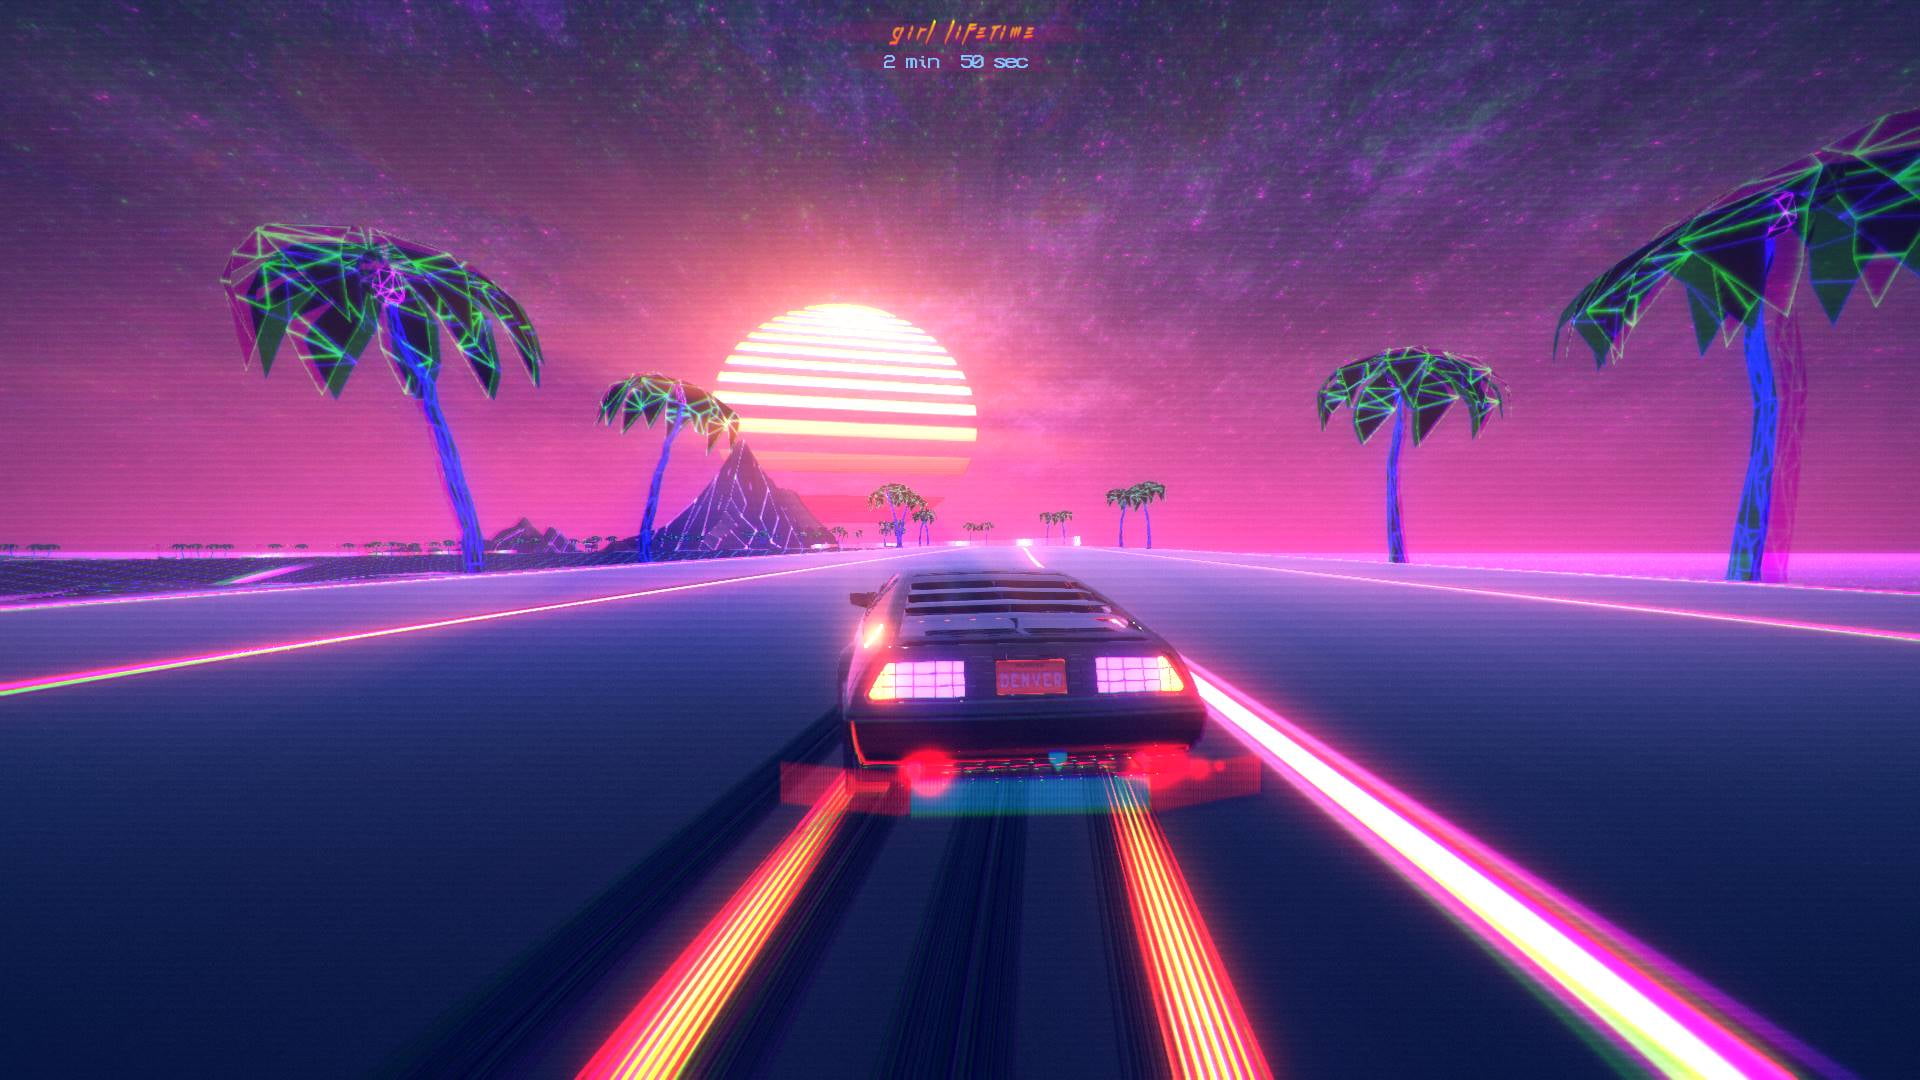 car game application, 1980s, vibes, Retro style, outdrive